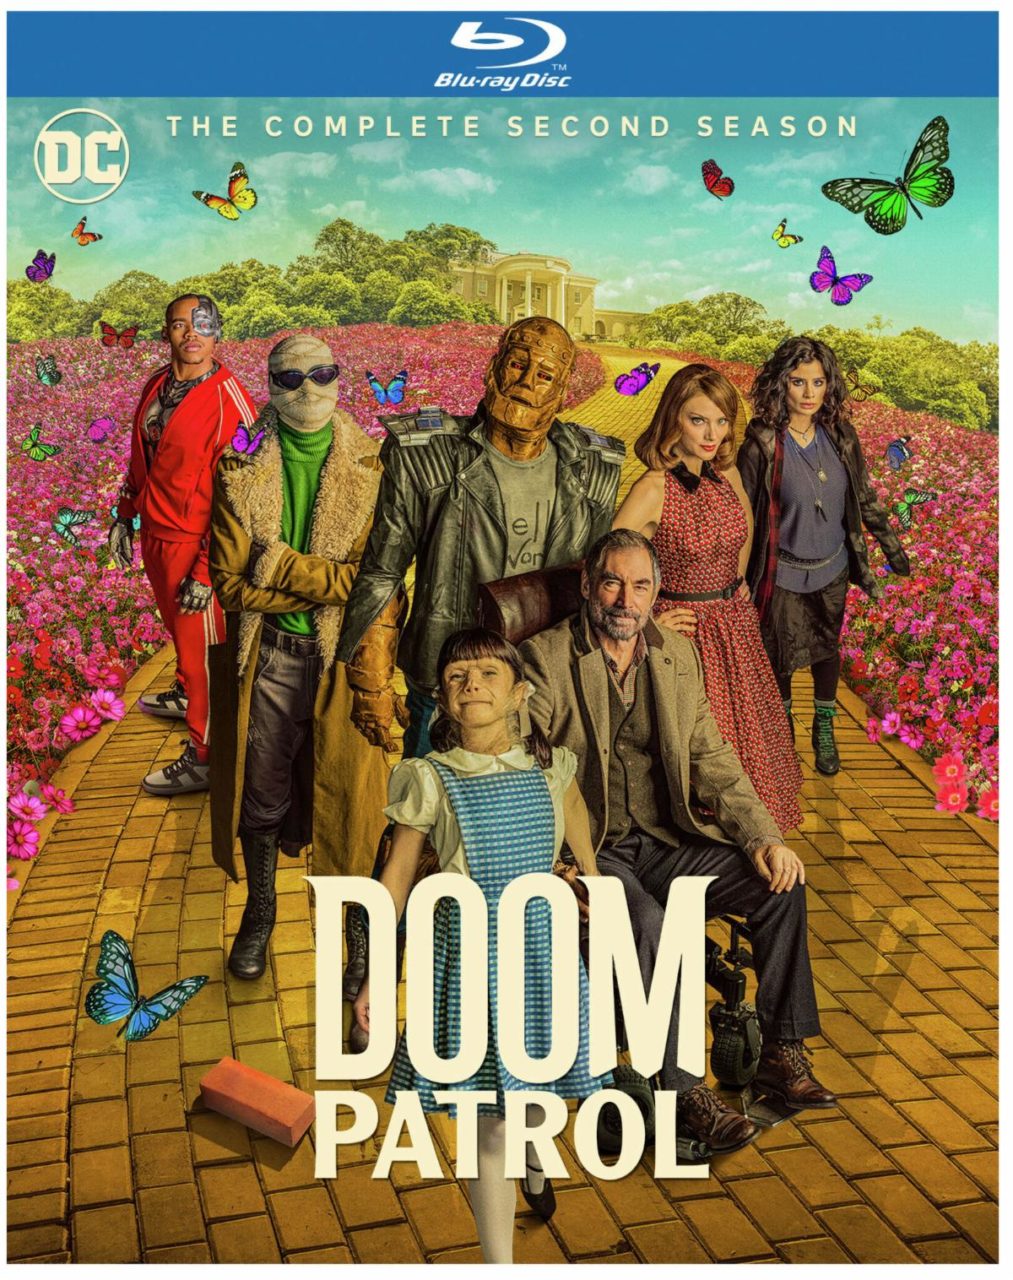 Doom Patrol: The Complete Second Season Blu-Ray Combo pack cover (Warner Bros. Home Entertainment)